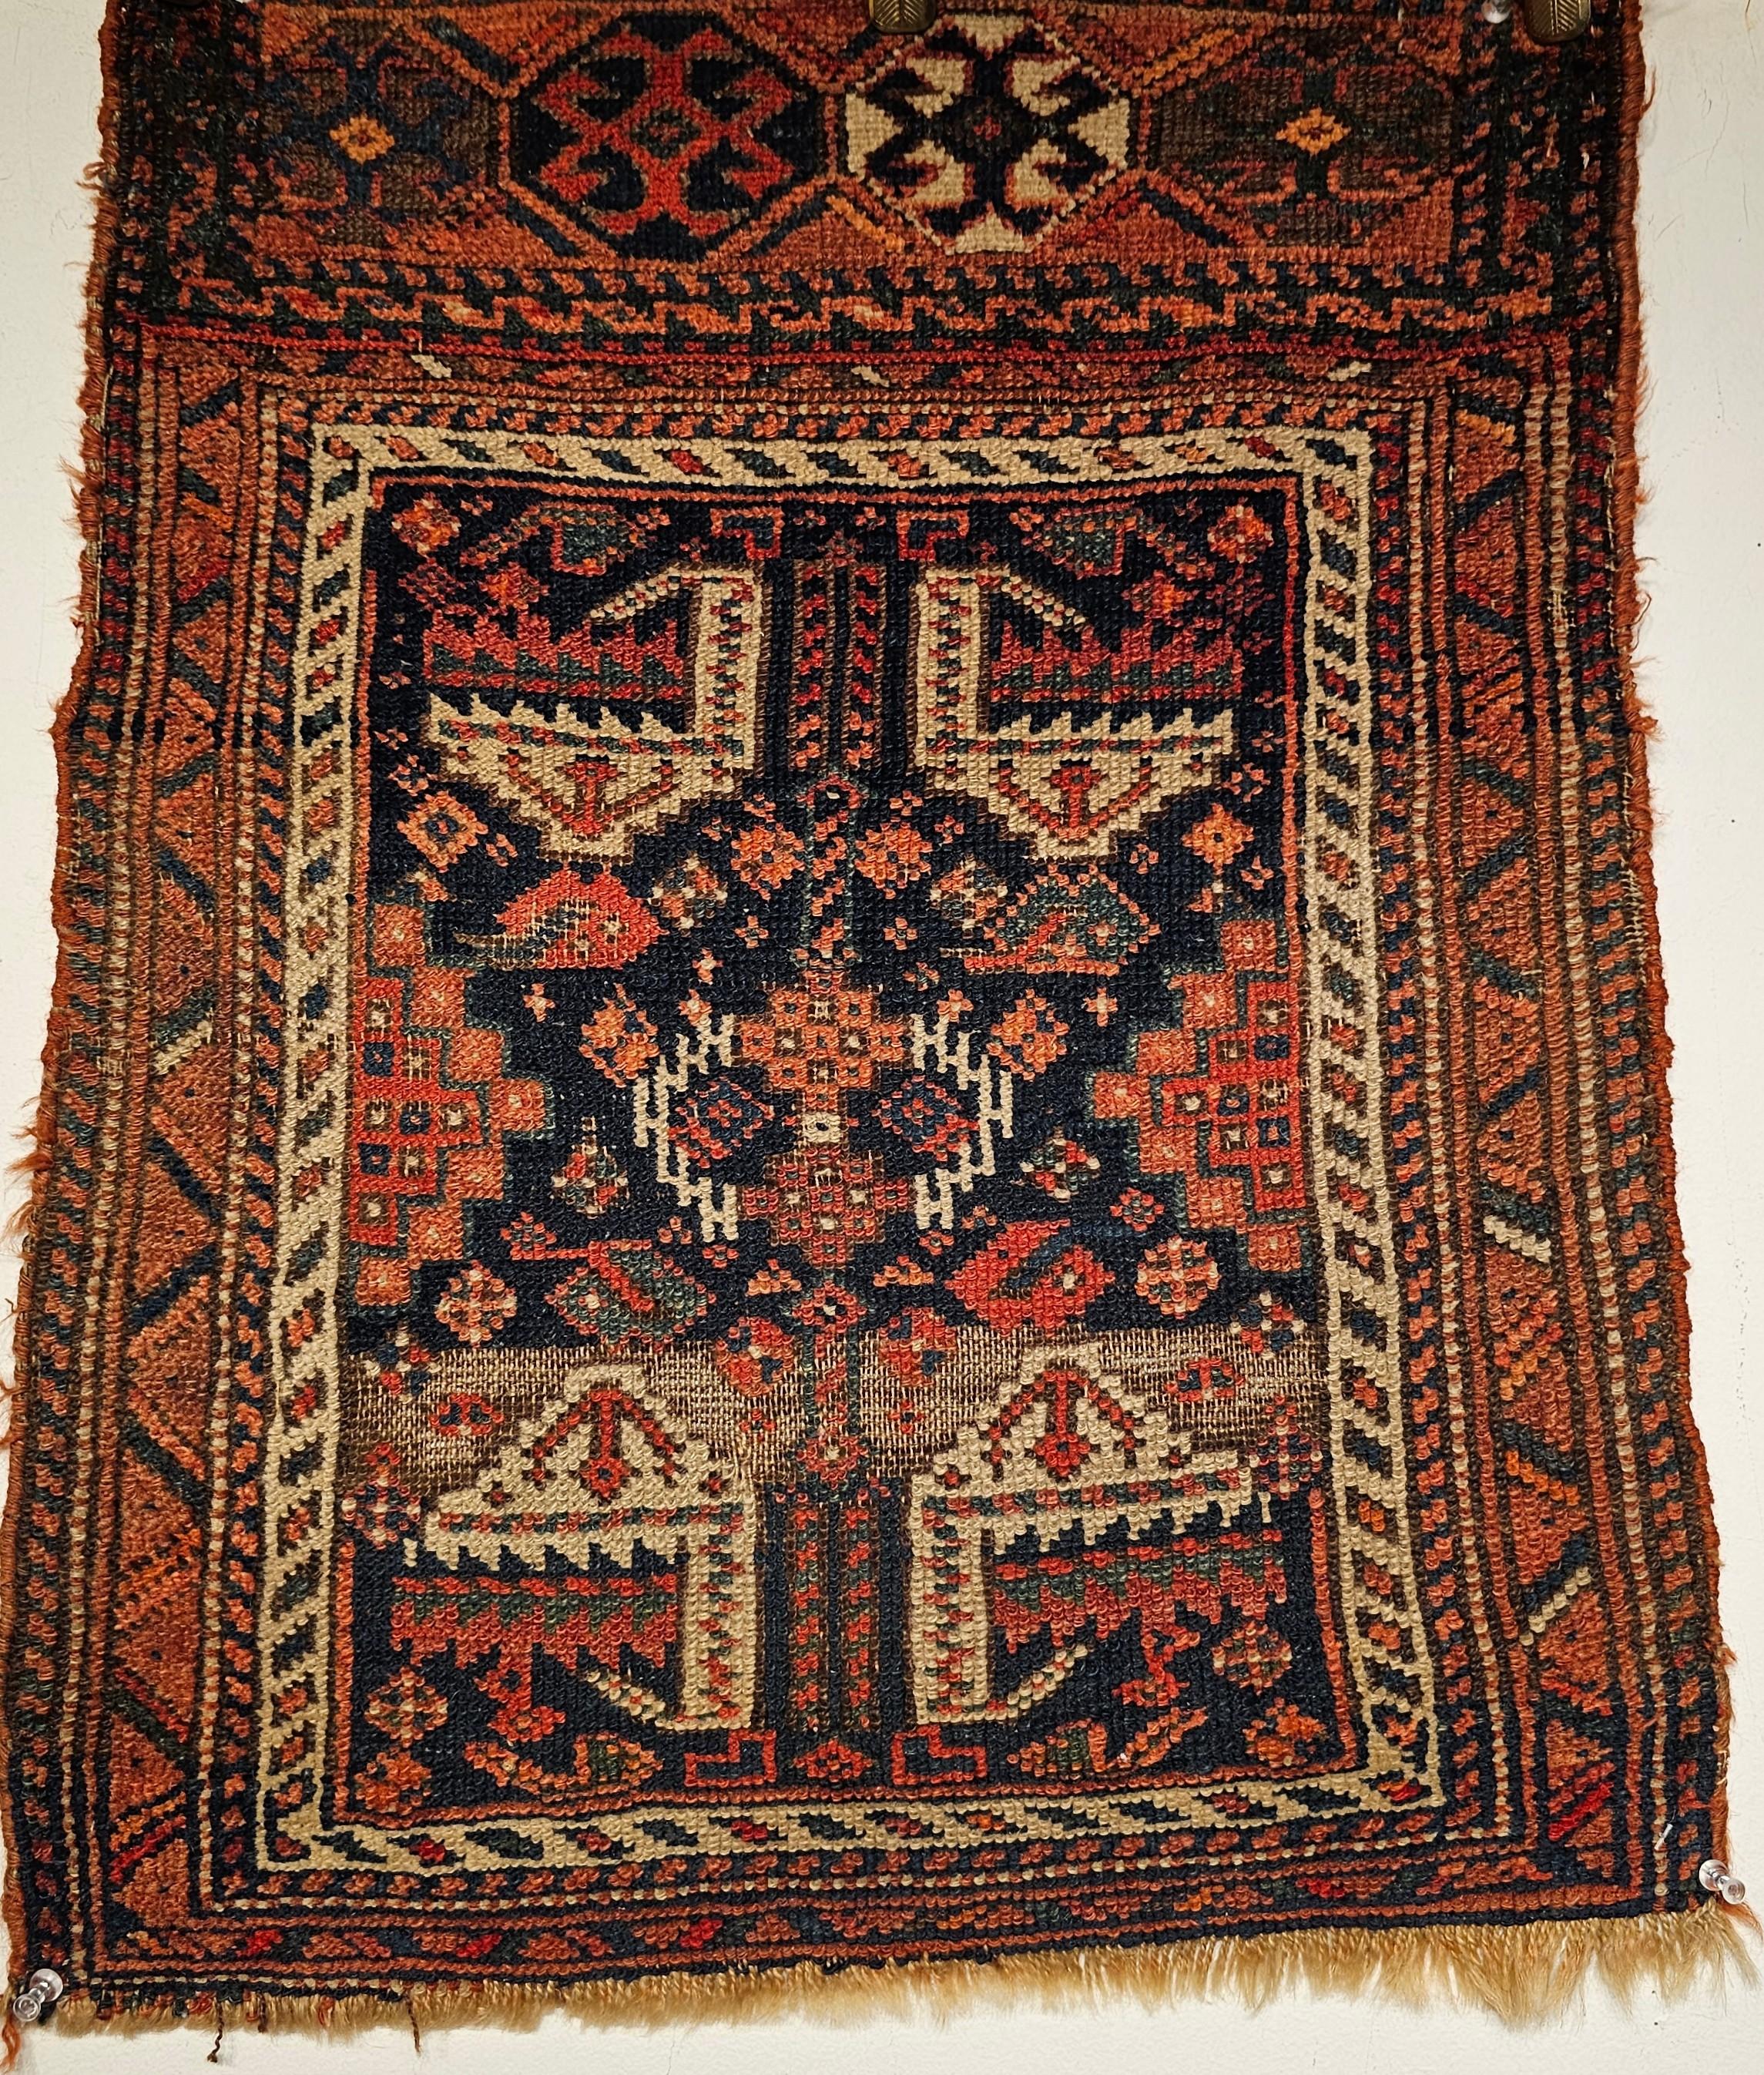 19th century Persian Afshar Tribal Bagface used as Nomadic People Wall Art. It could have been the face of a saddlebag. The bag face and mafrash items started their lives as utilitarian items for the use by the village and tribal weavers and more